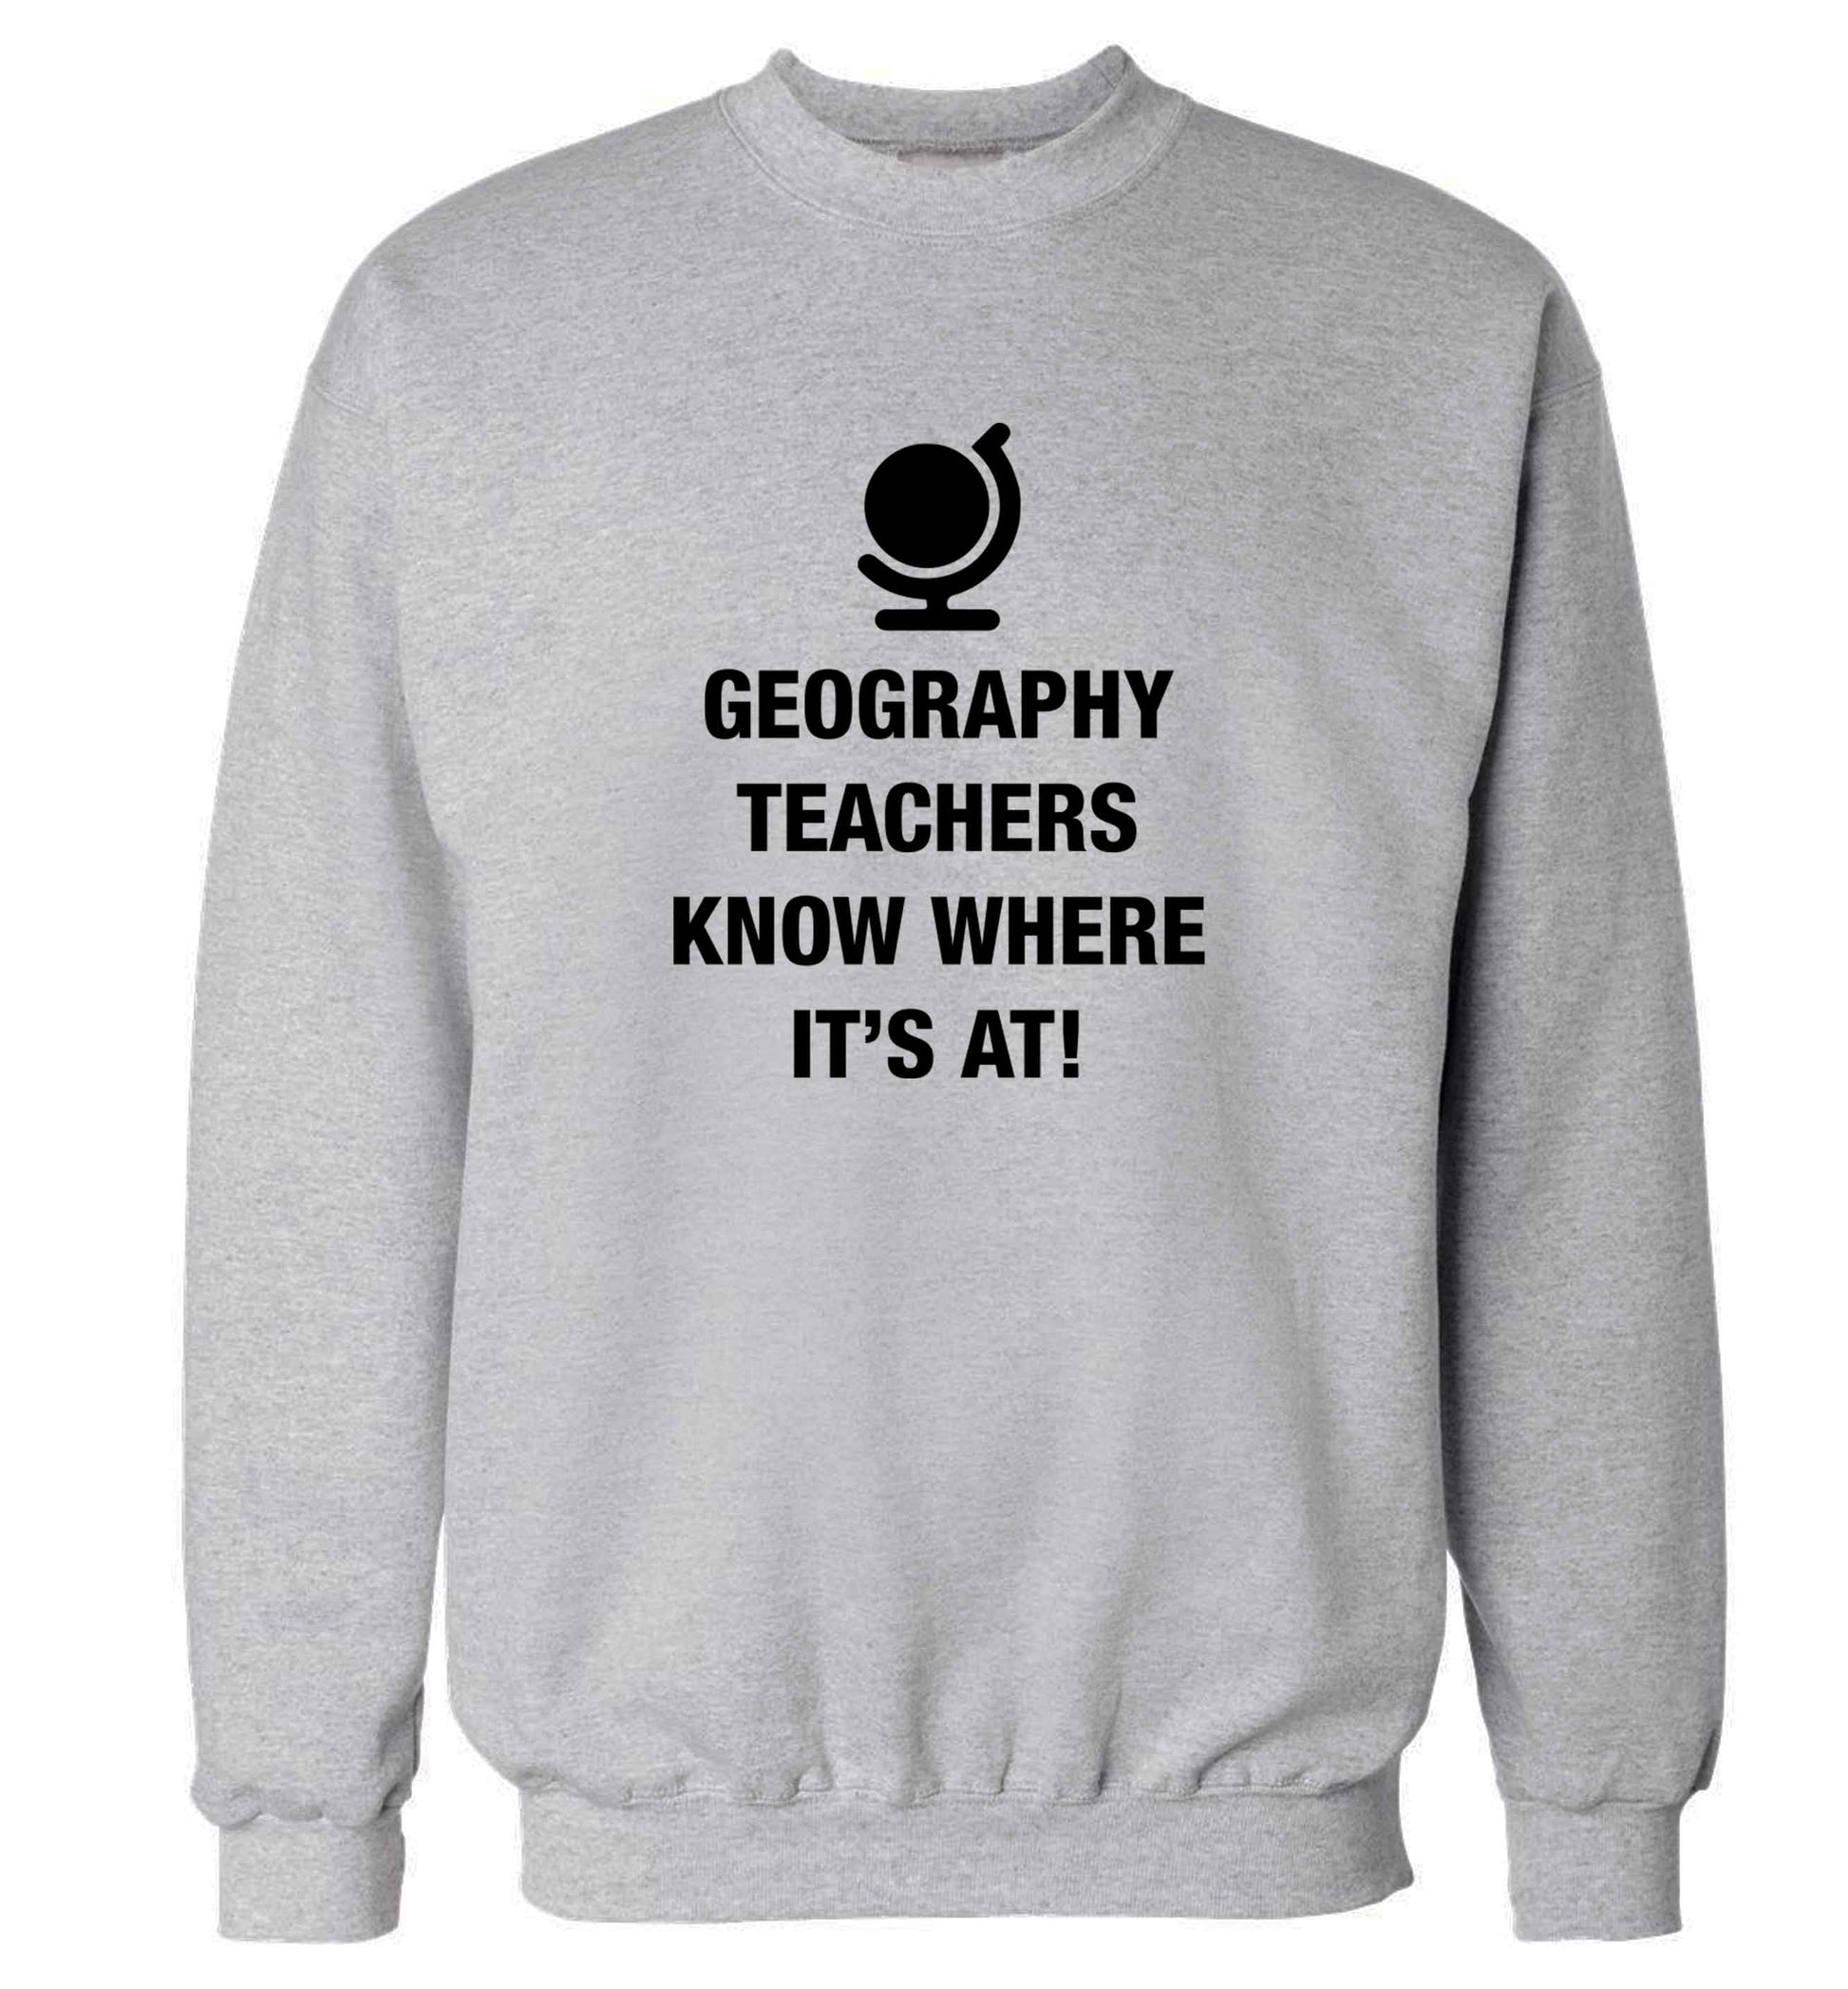 Geography teachers know where it's at adult's unisex grey sweater 2XL